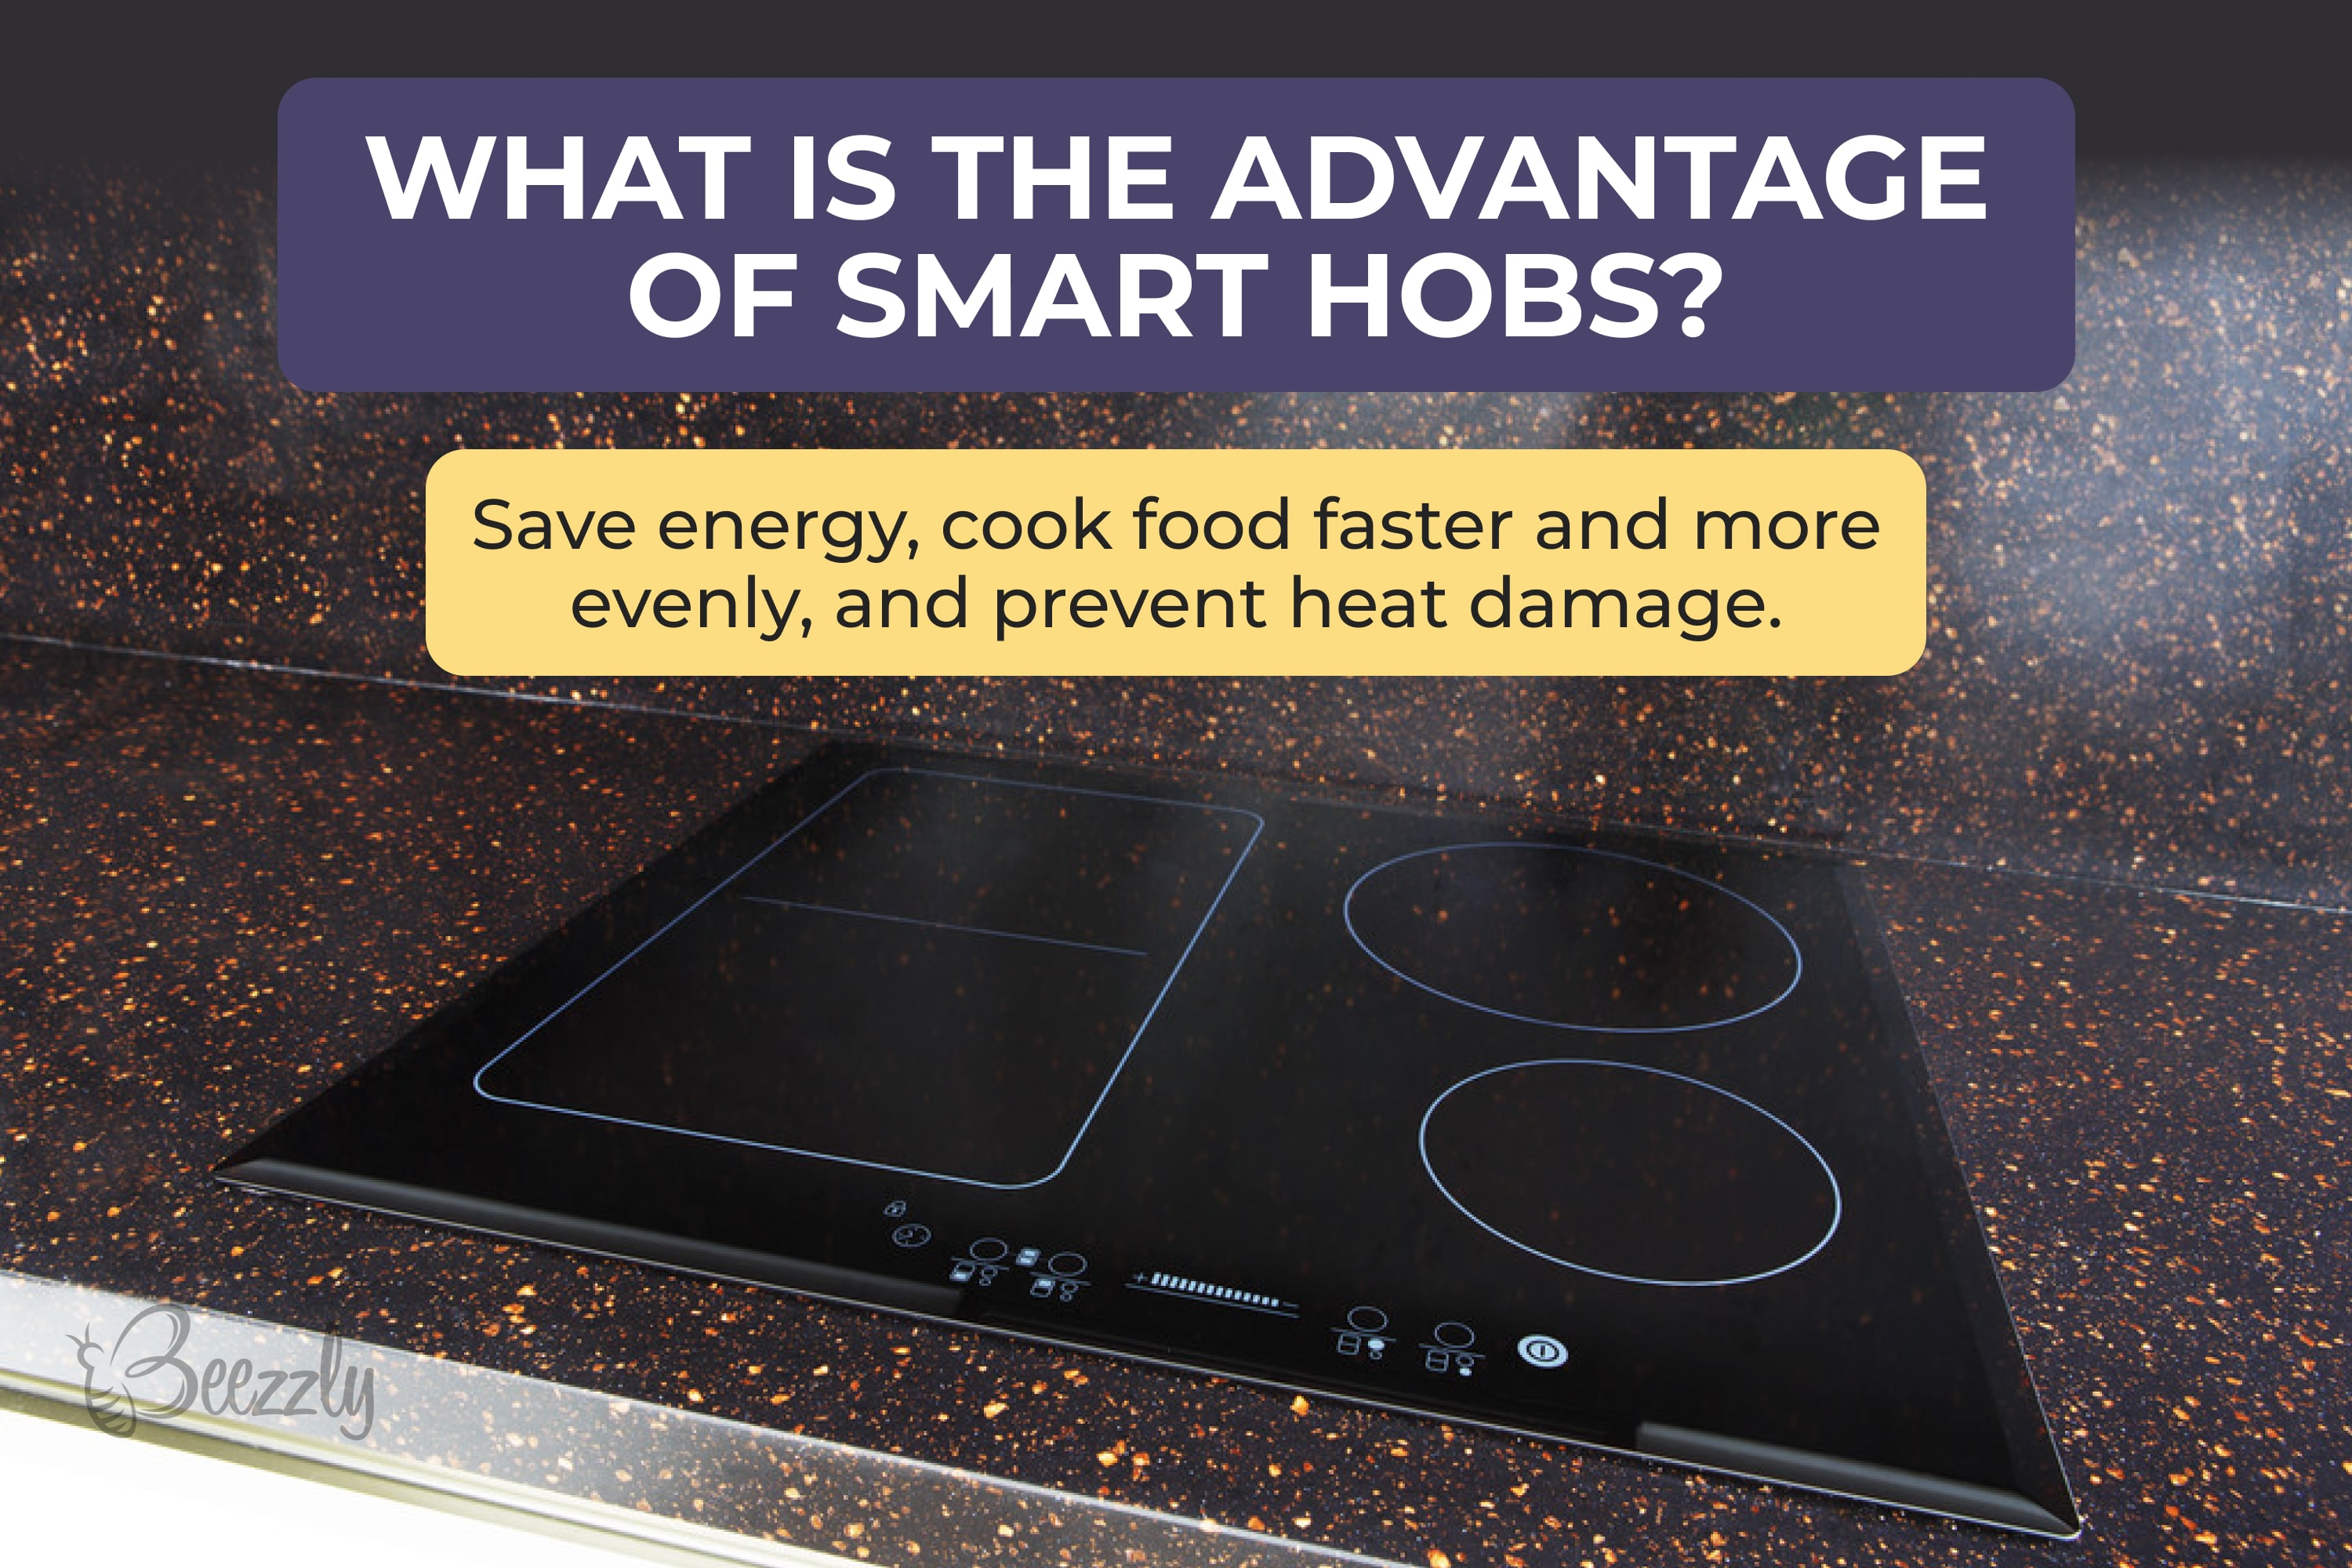 What is the advantage of smart hobs